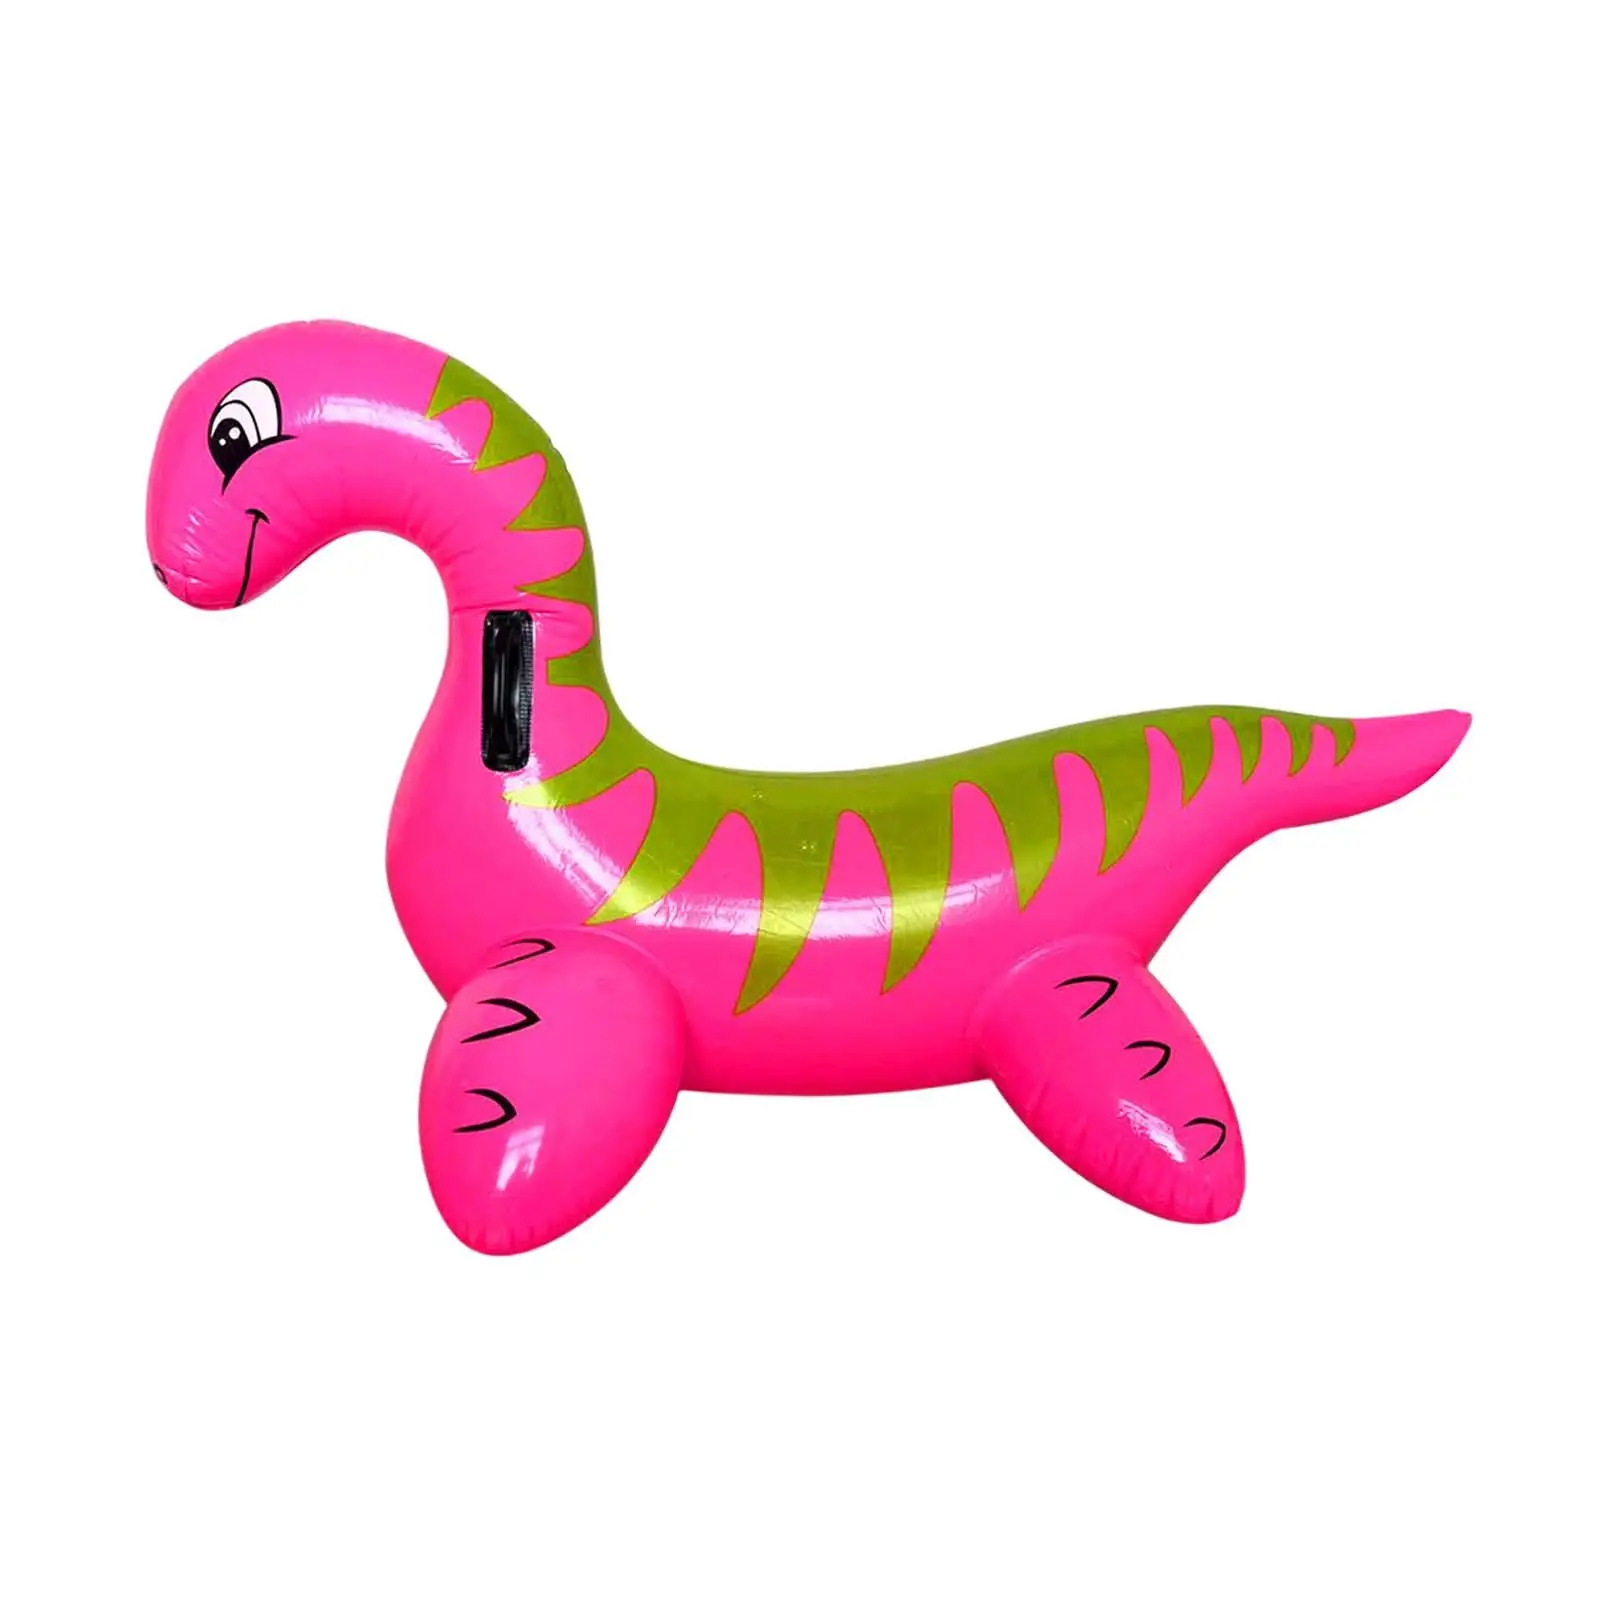 Dinosaur Pool Floats Ride Ons Lounge Toys Summer Water Inflatable Swimming pool floats Pool Toys for Party Gifts Beach Swimming